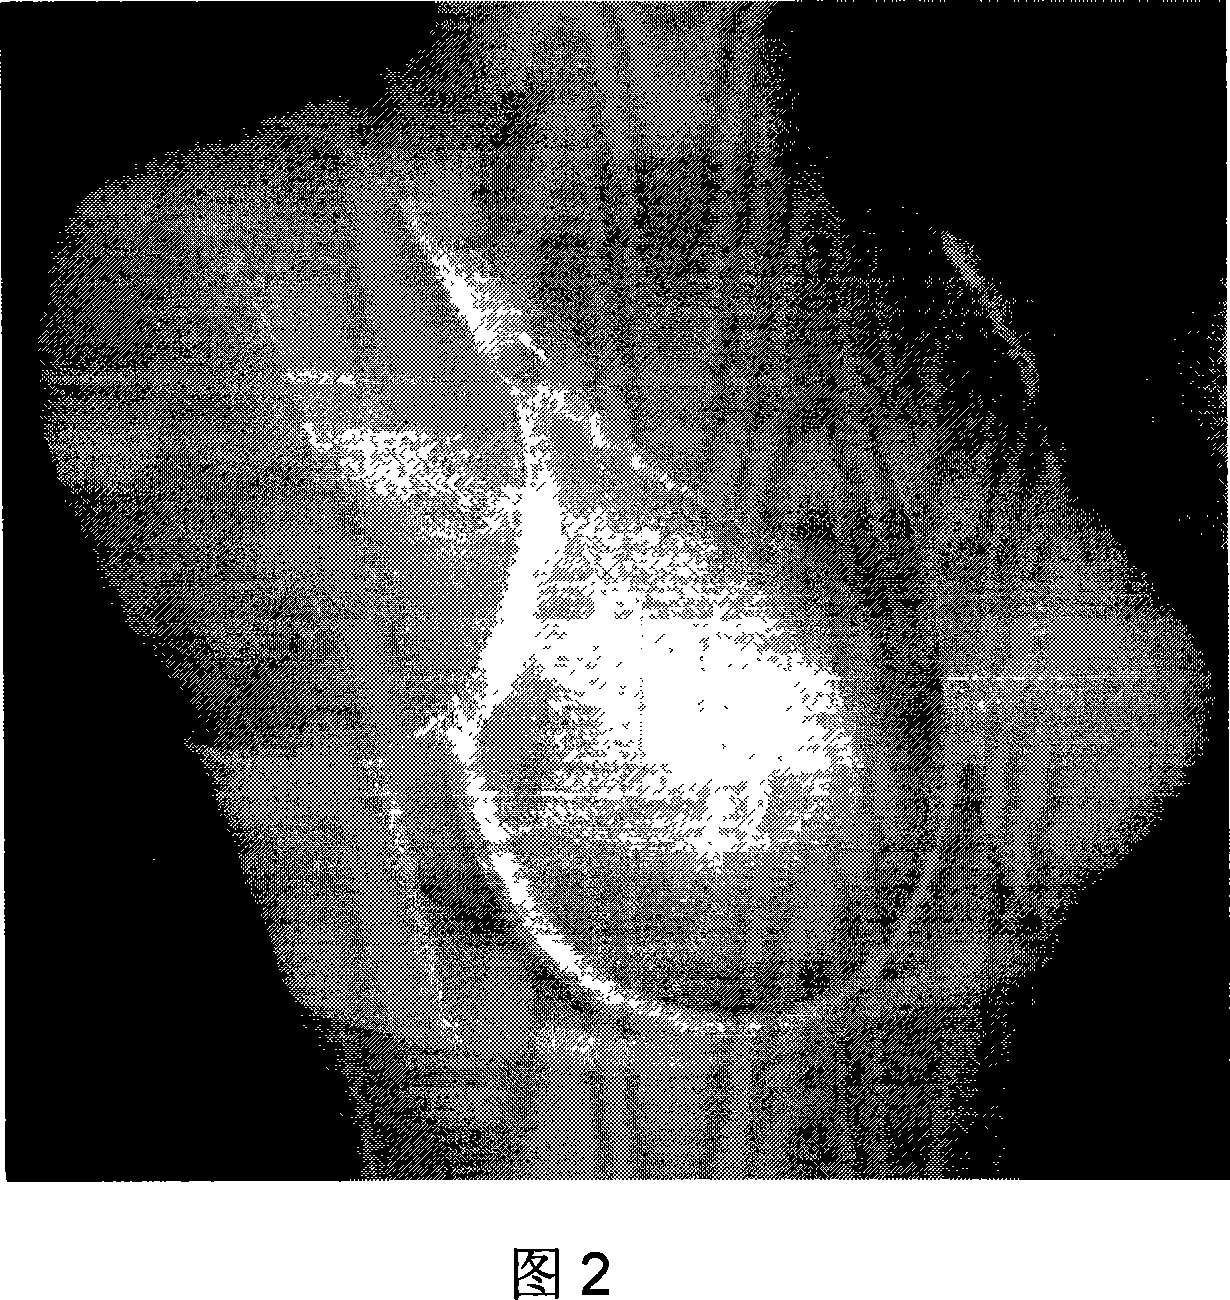 Method for colligated judging of the fitness of the bra on the basis of layer analysis